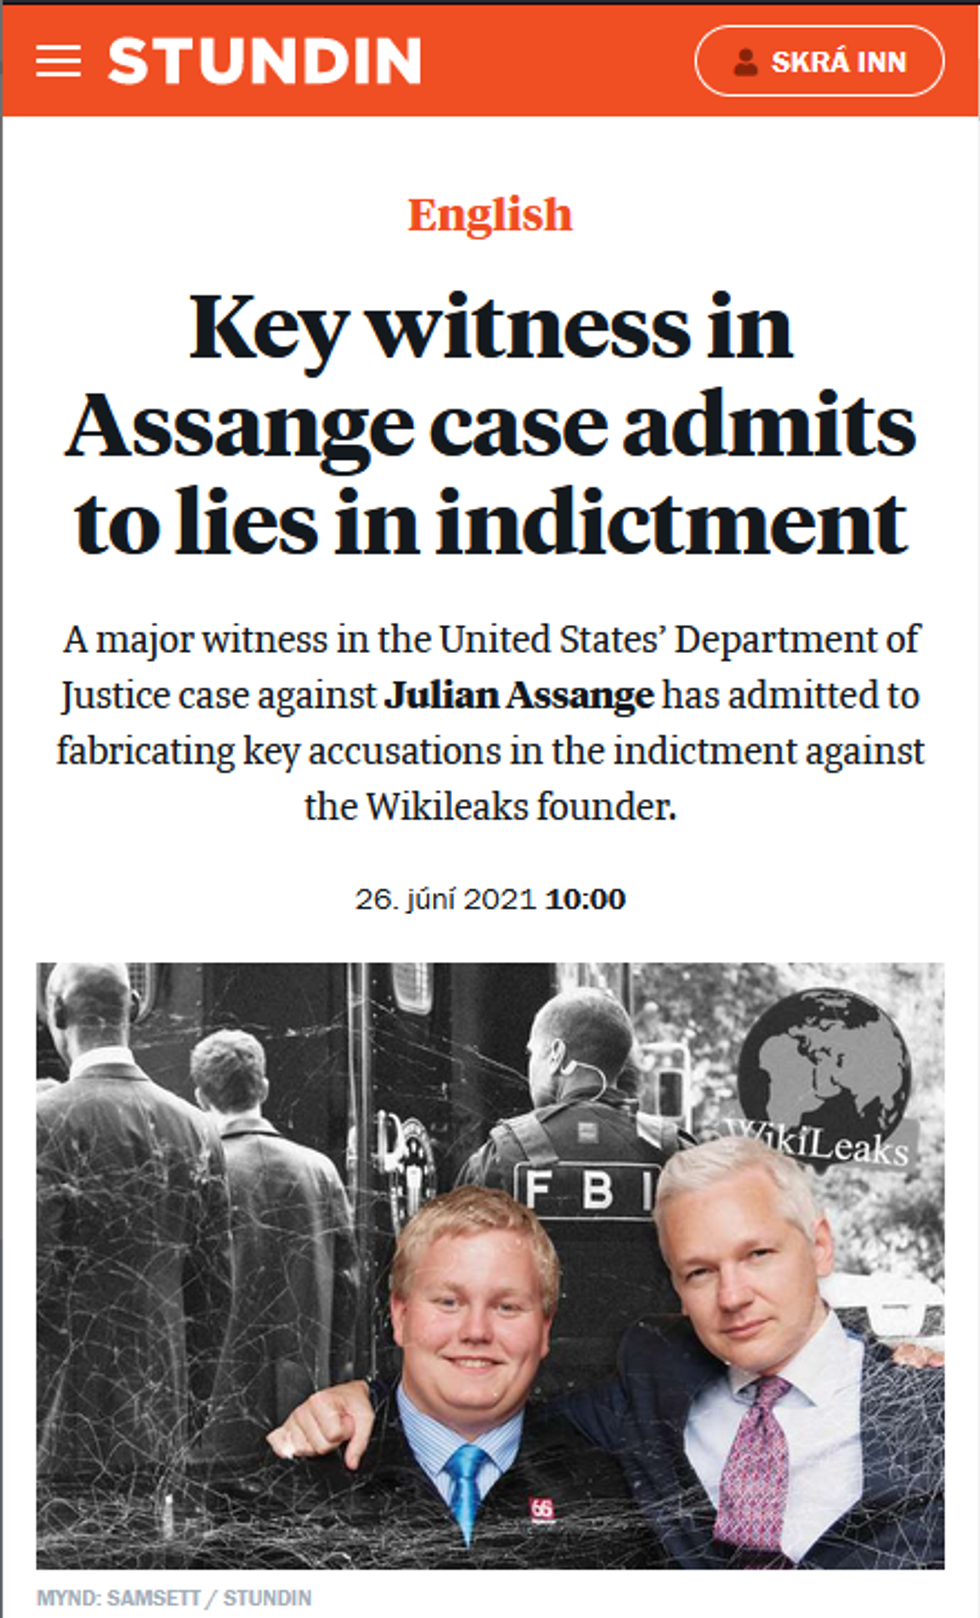 Stundin: Key witness in Assange case admits to lies in indictment